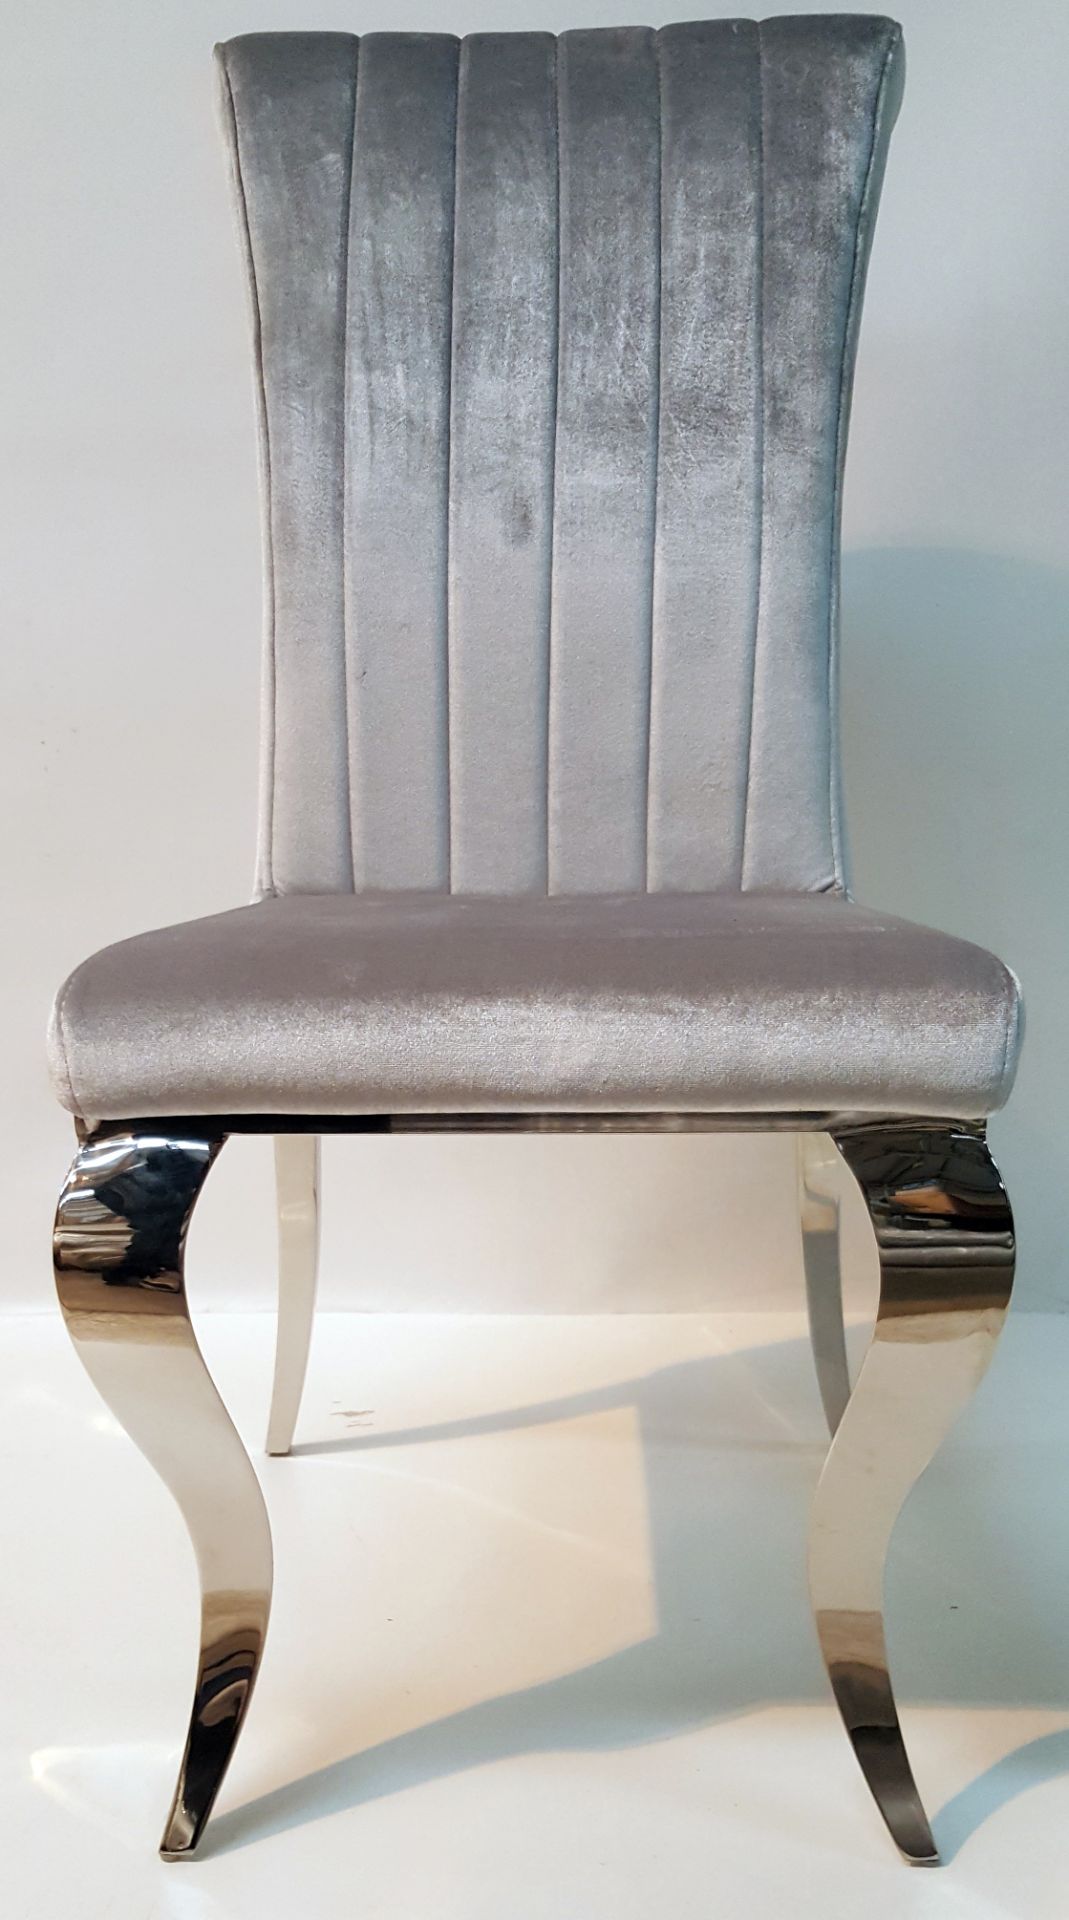 3 x STYLISH SILVER PLUSH VELOUR DRESSING/DINING TABLE CHAIRS - CL408 - Location: Altrincham WA14 - Image 3 of 5